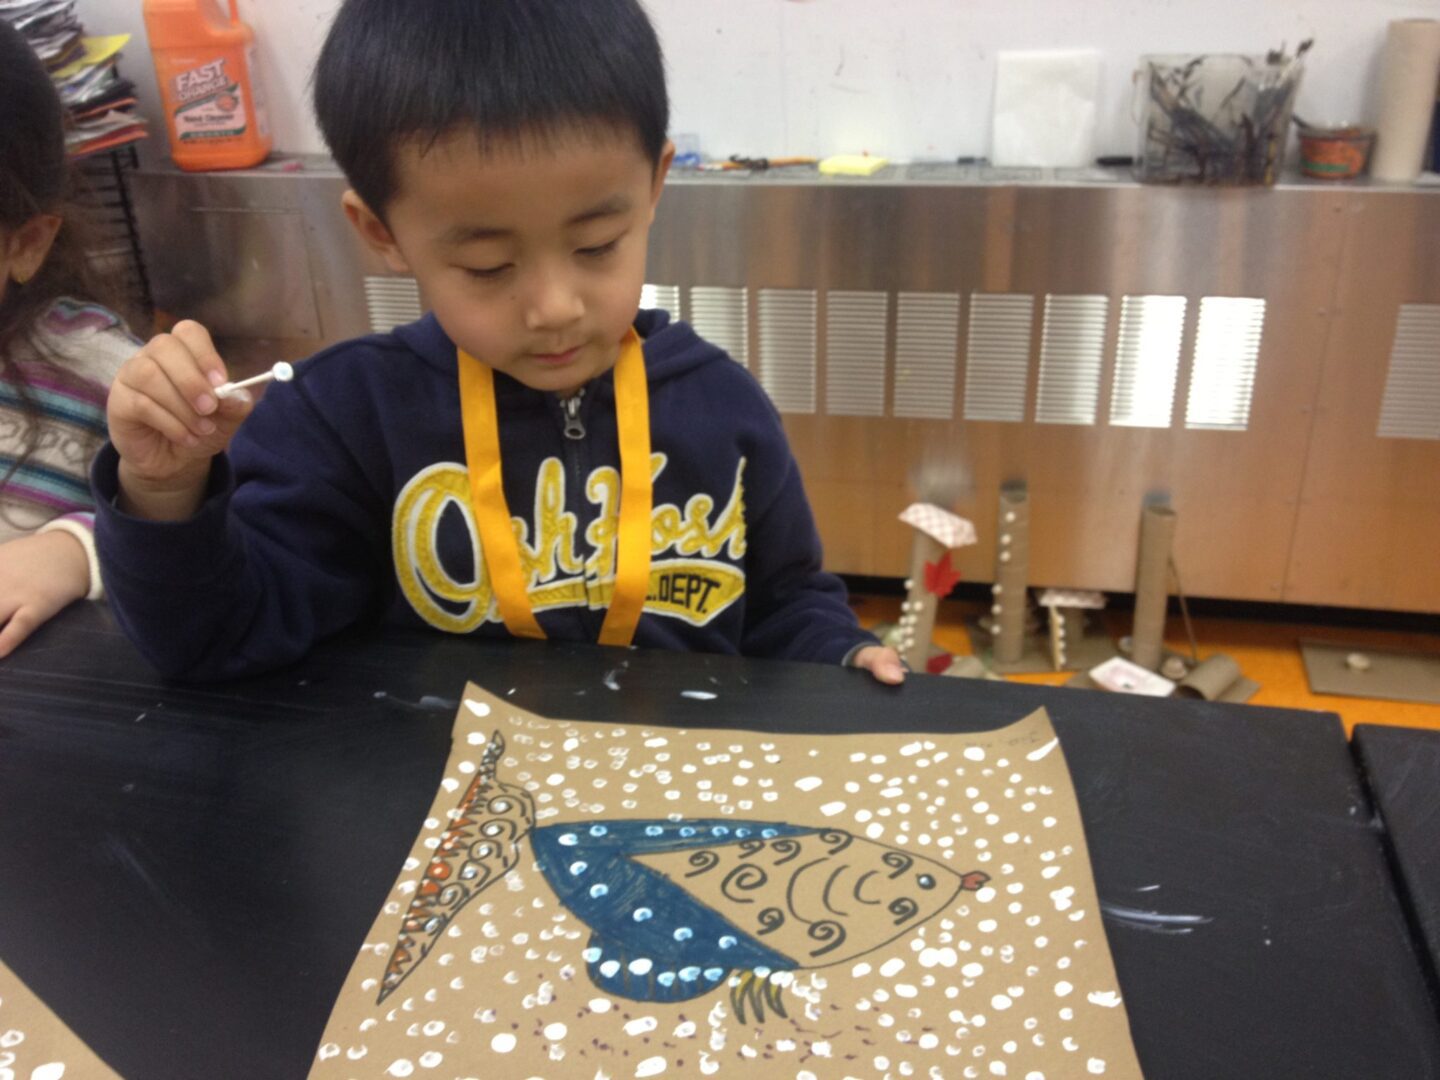 A young boy is painting a fish on a piece of paper.